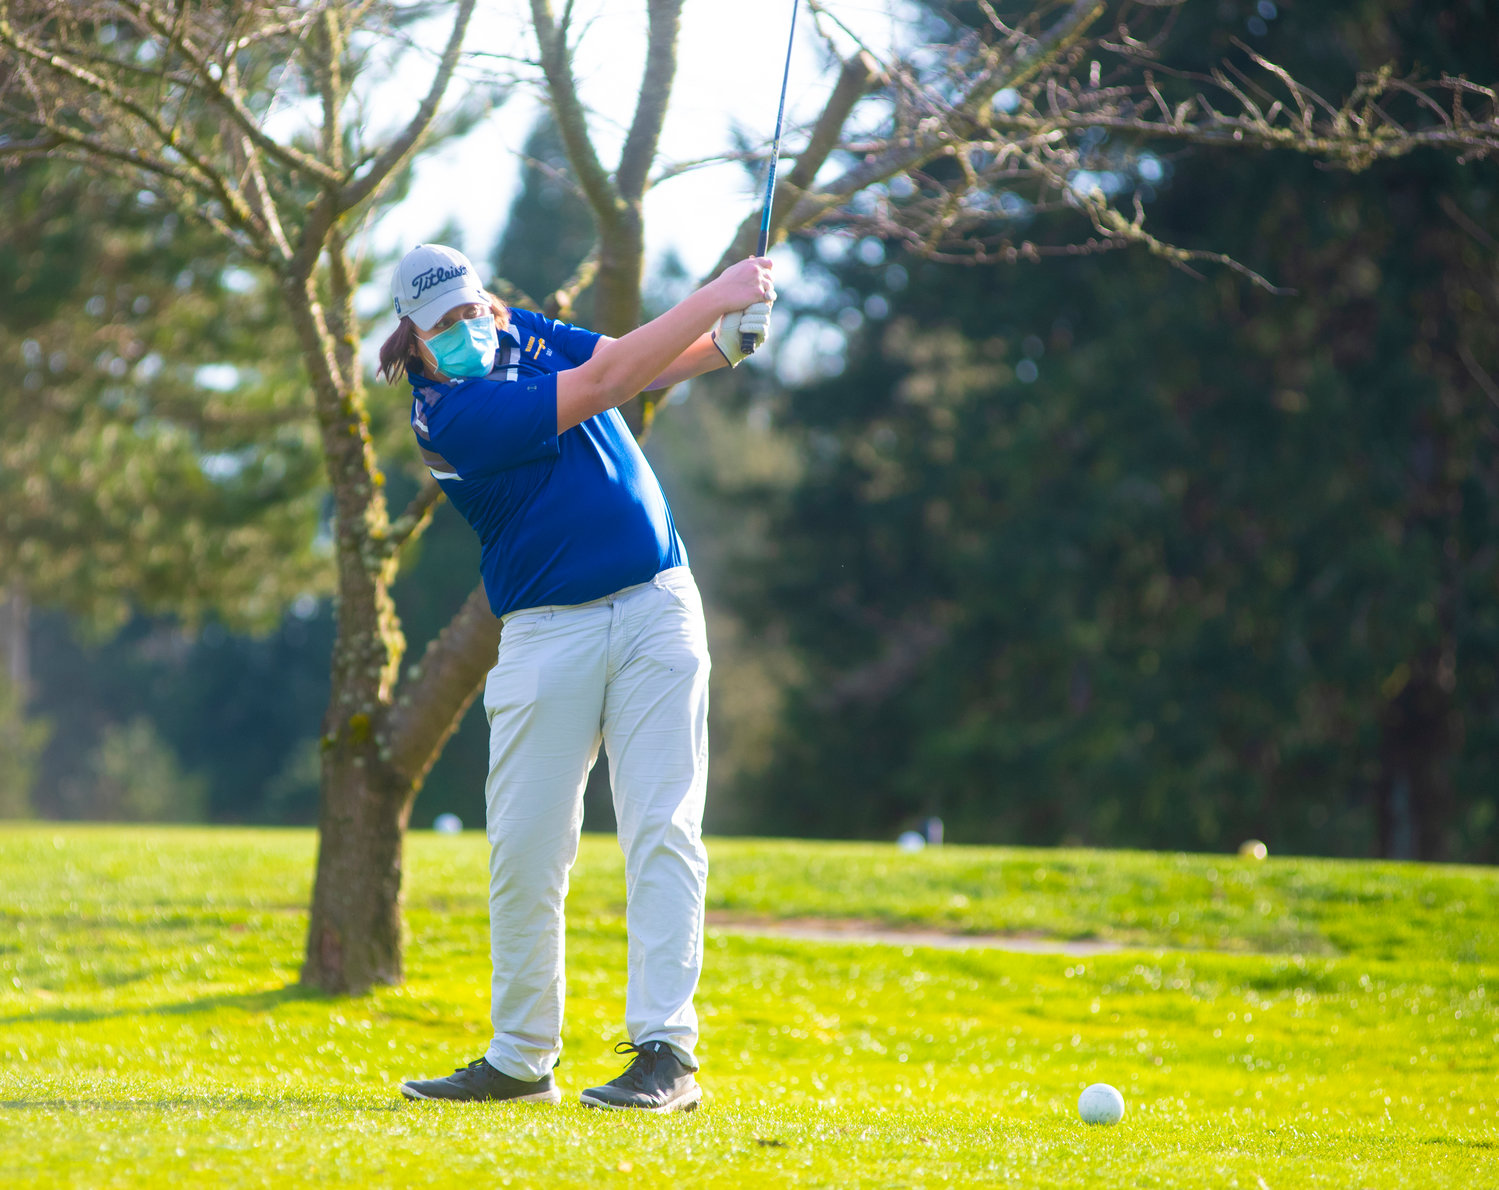 Rochester's Ethan Eyer tees off against Tumwater at Riverside Golf Course Wednesday.